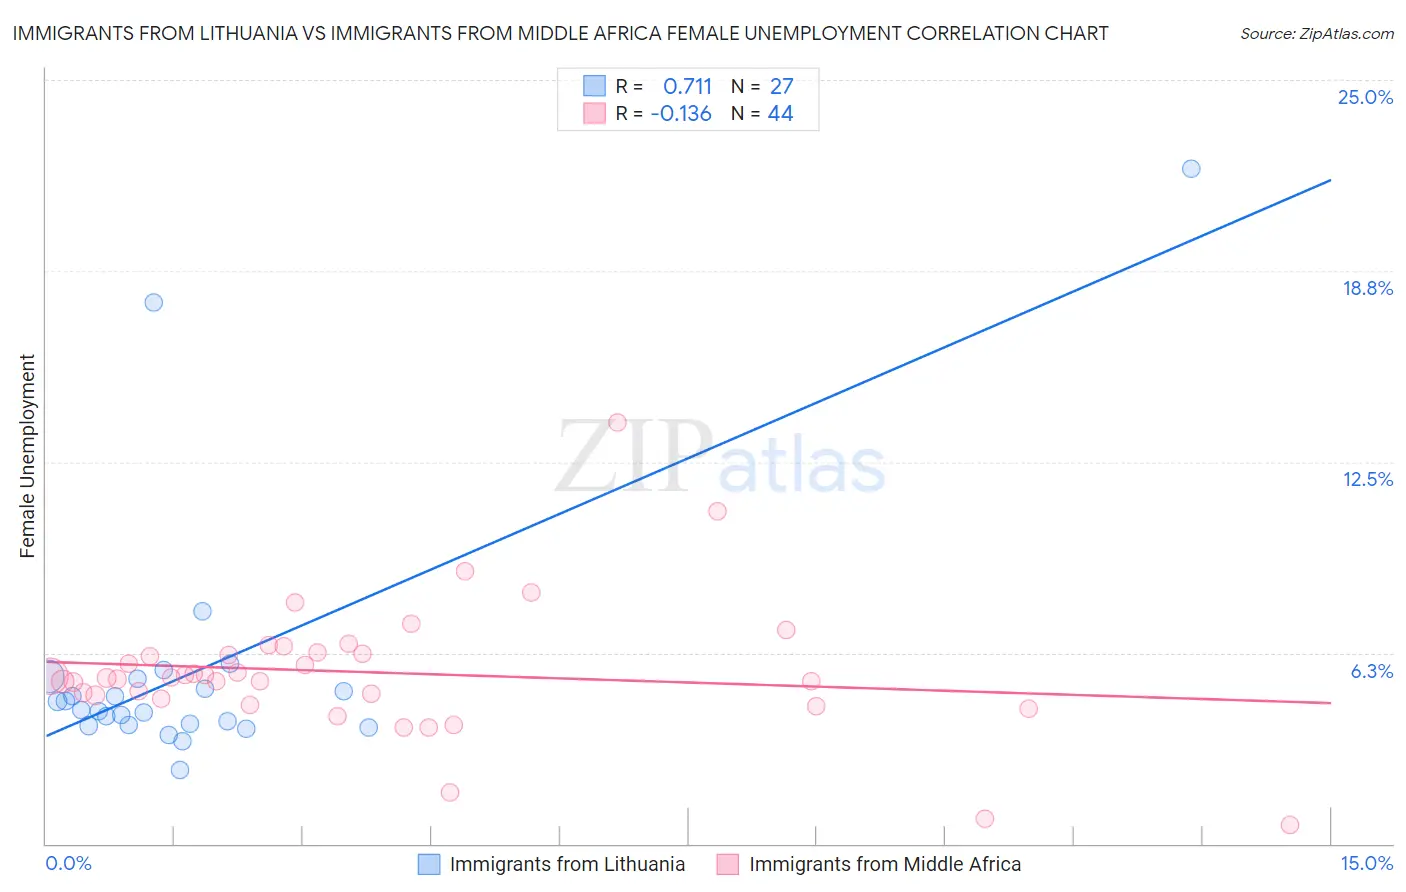 Immigrants from Lithuania vs Immigrants from Middle Africa Female Unemployment